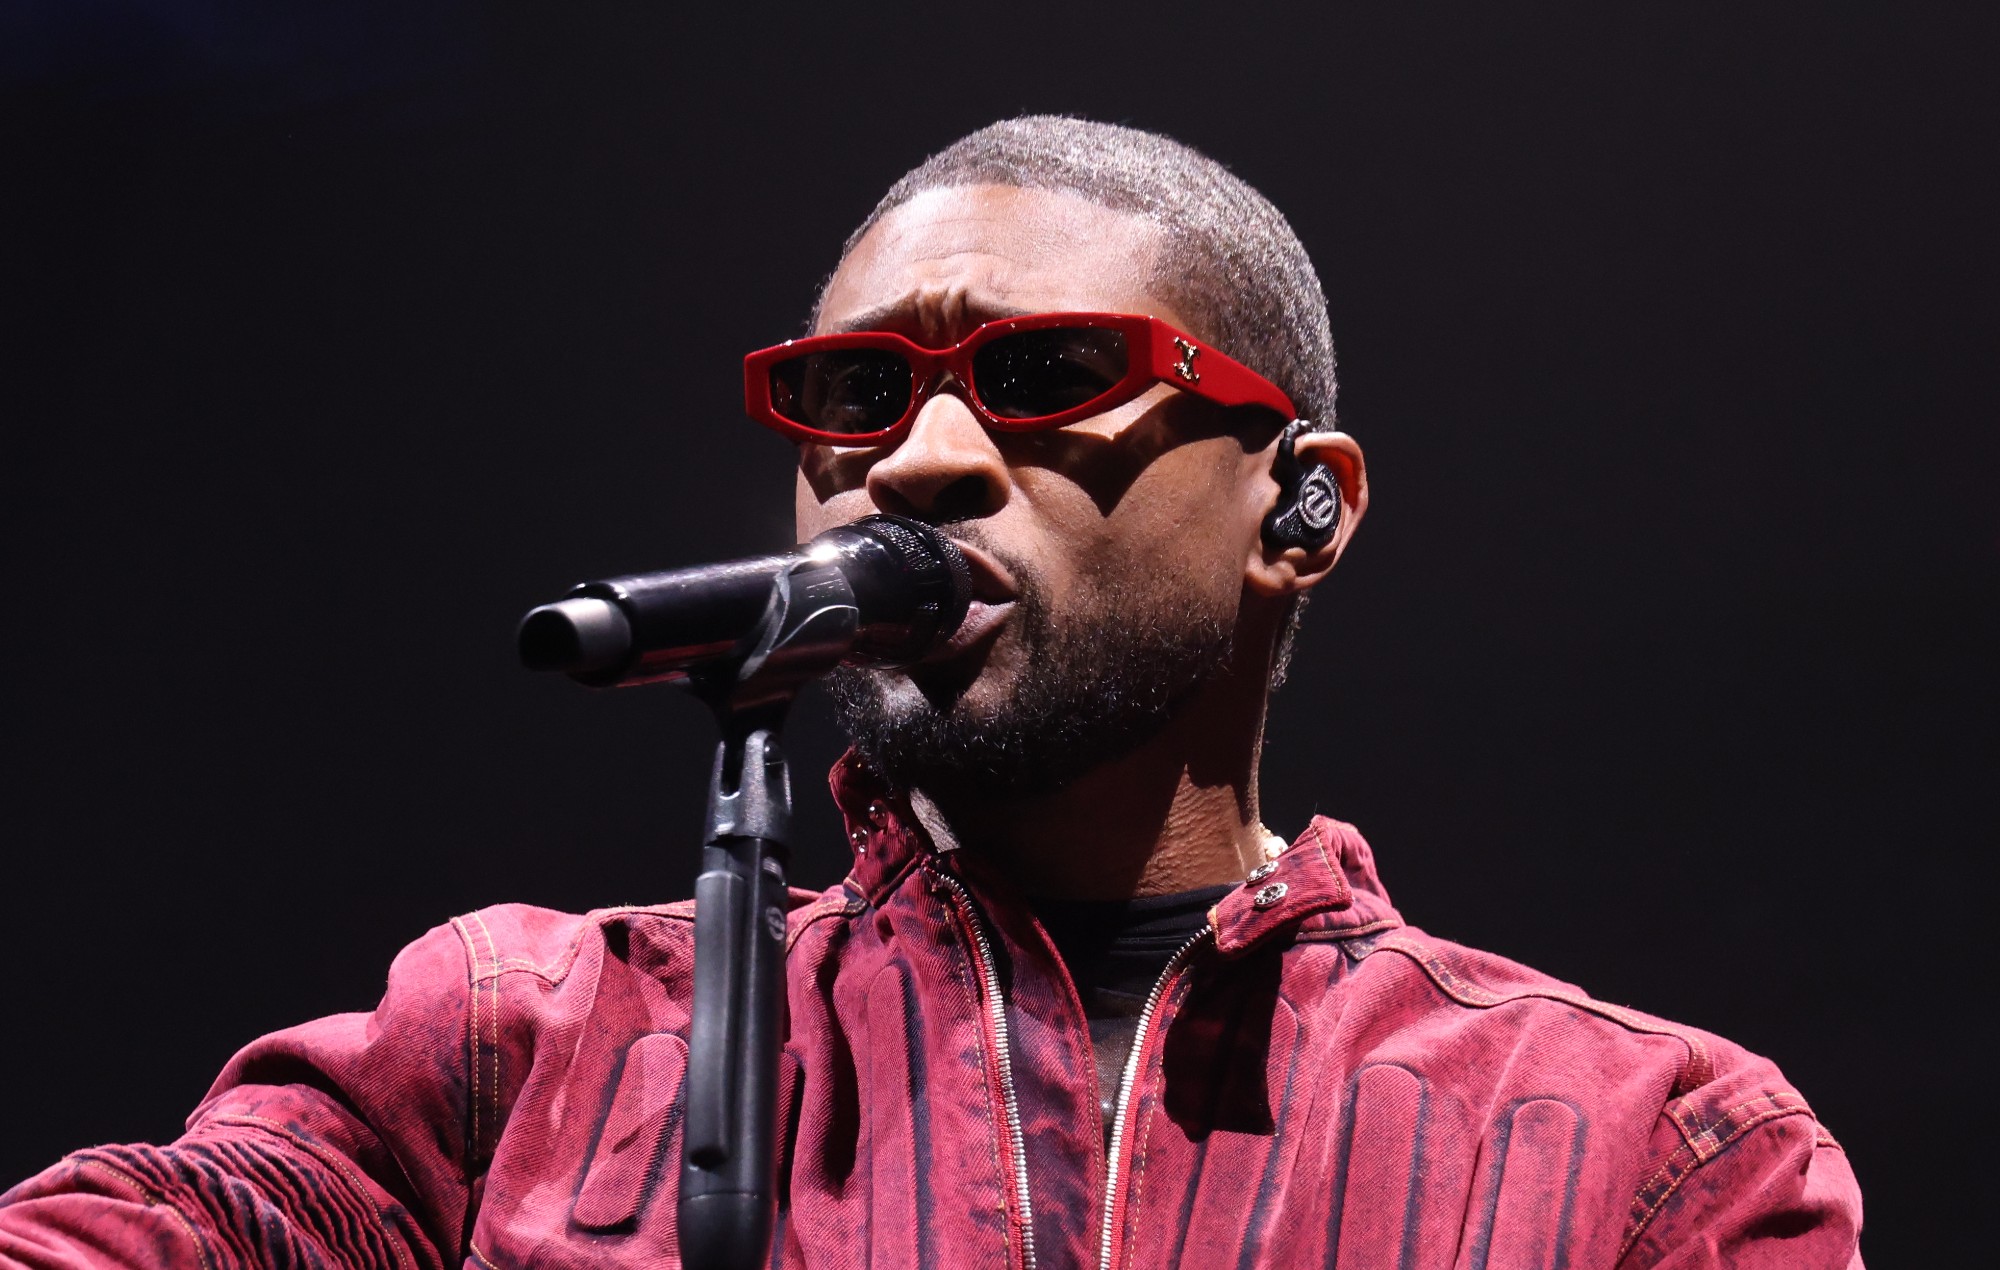 Usher reveals tracklist for new album ahead of Super Bowl performance